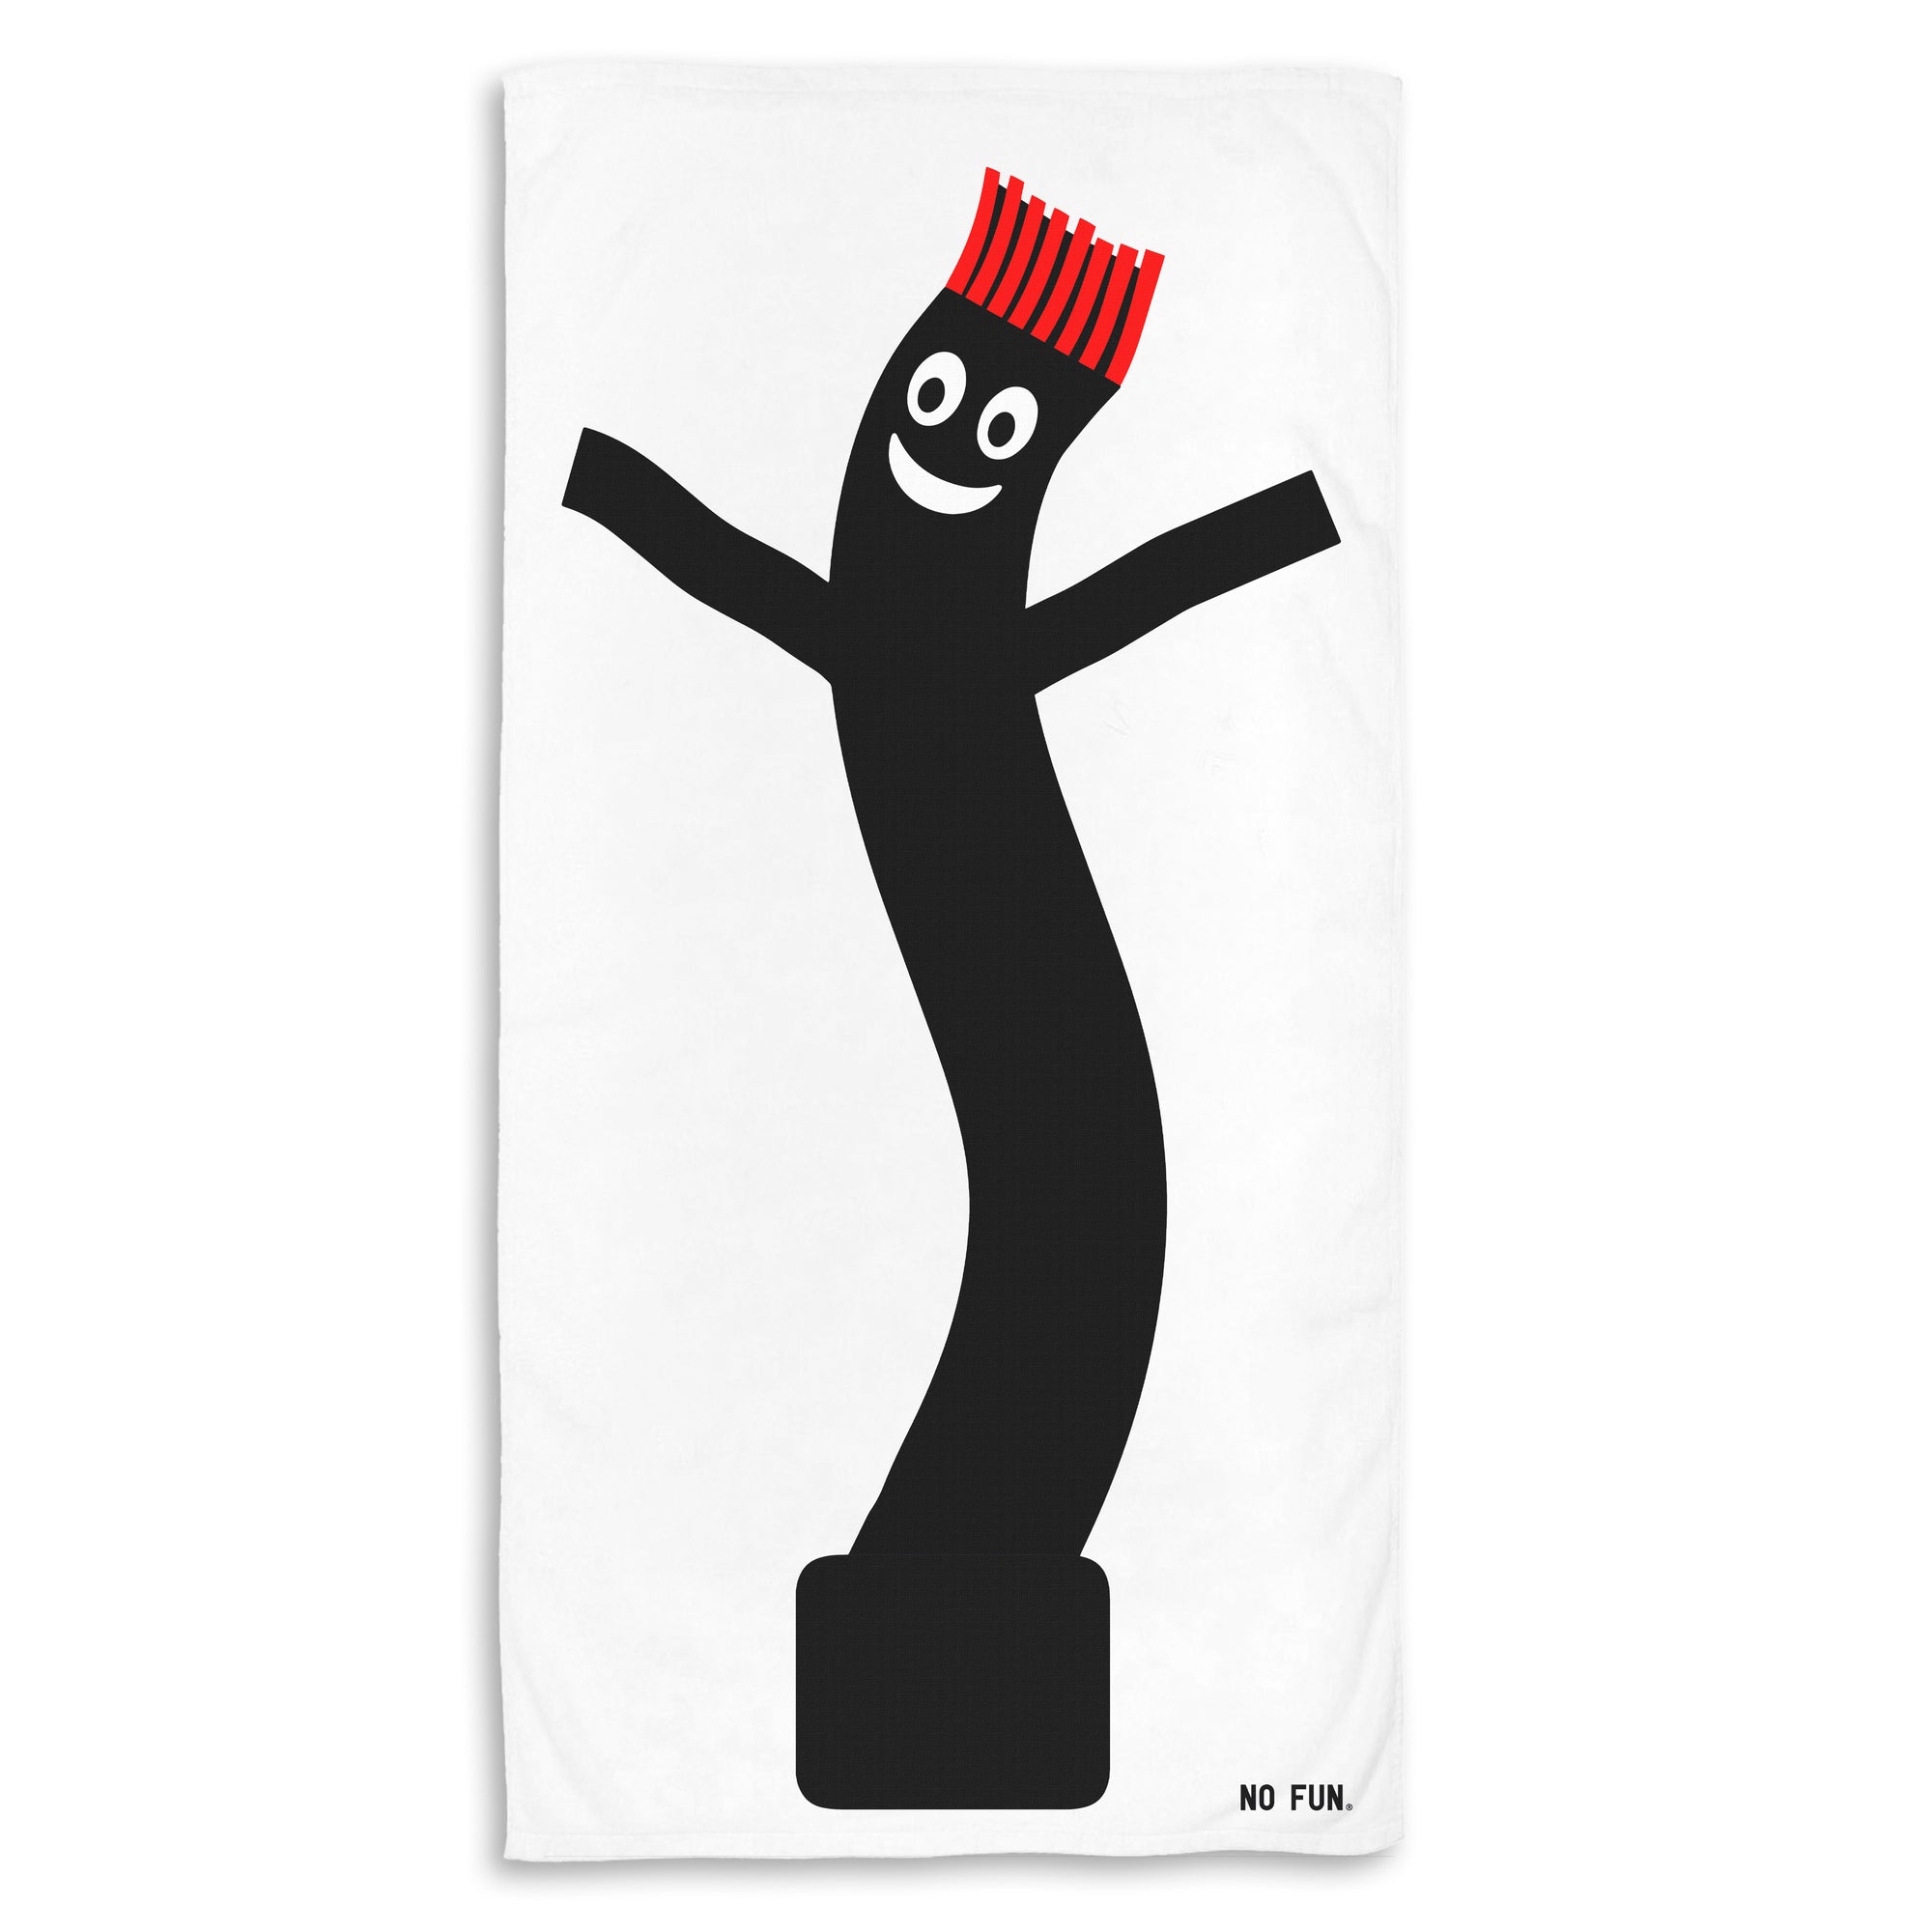 The "Wacky Wavy" Beach Towel by No Fun®. The towel is white, and features a large, black, "Wacky Waving" tube man graphic. The tube man has red hair, and a smily face. There is a small, black, No Fun® logo in the bottom right hand corner of the towel.